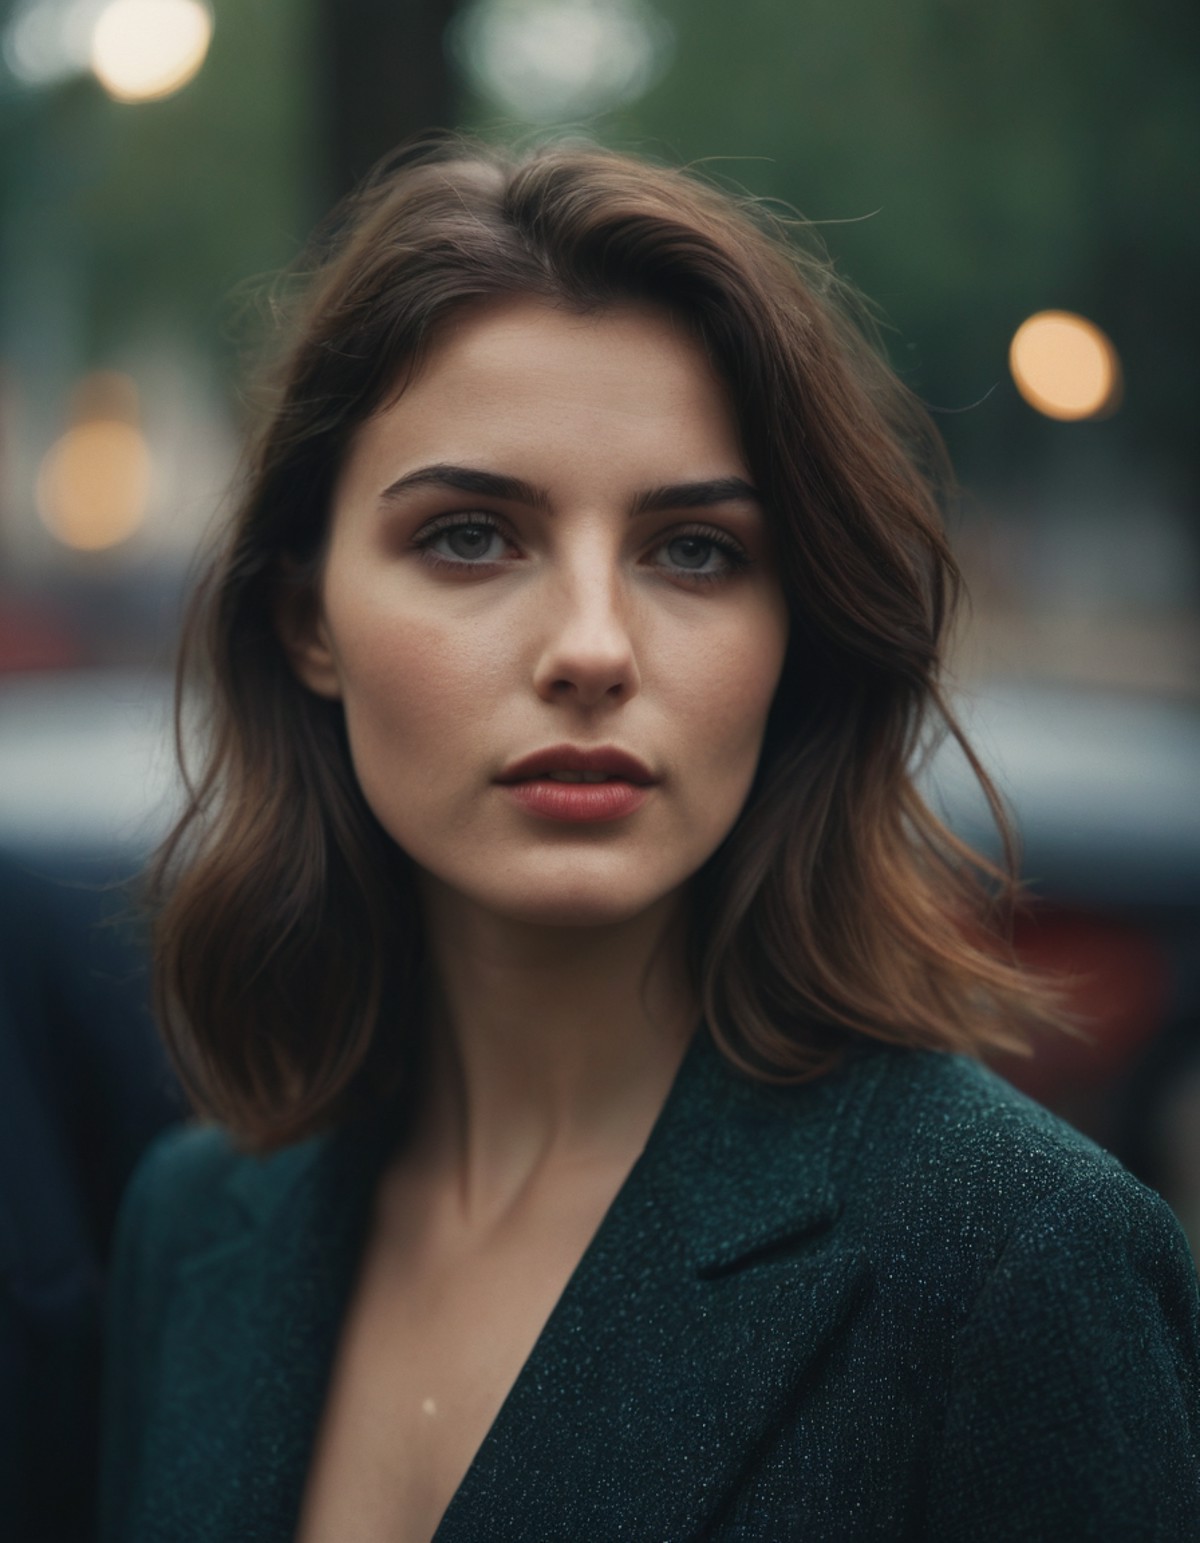 cinematic still, style of Alessio Albi, A fair-skinned woman. 35mm photograph. emotional, harmonious, vignette, highly det...